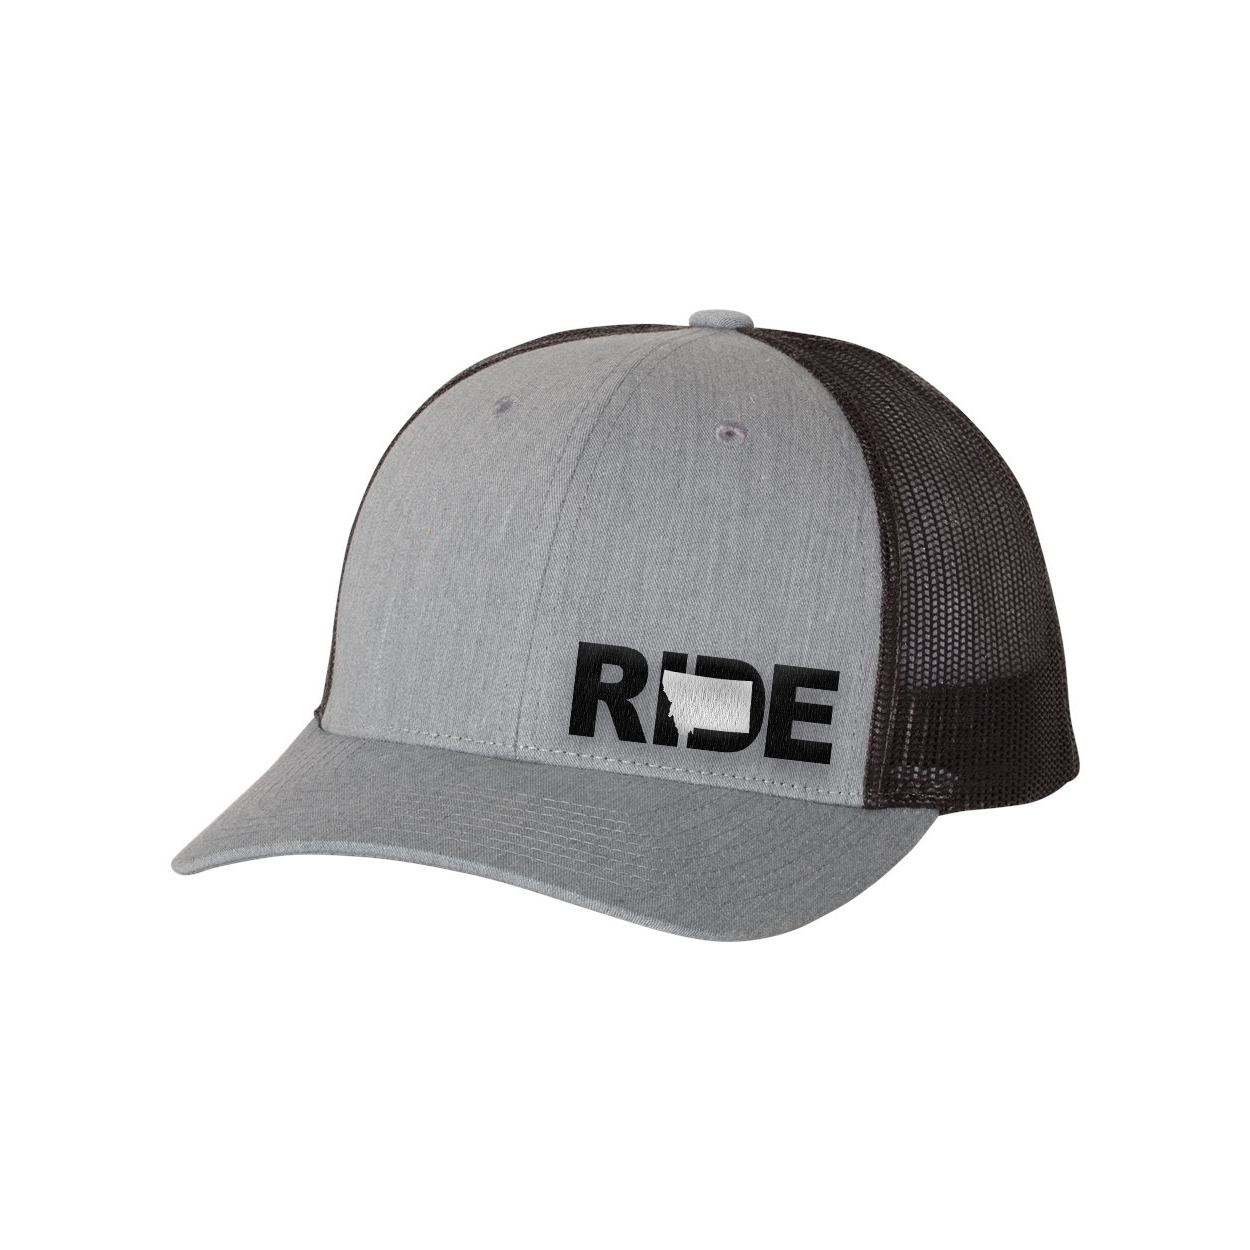 Ride Montana Night Out Pro Embroidered Snapback Trucker Hat Heather Gray/Black